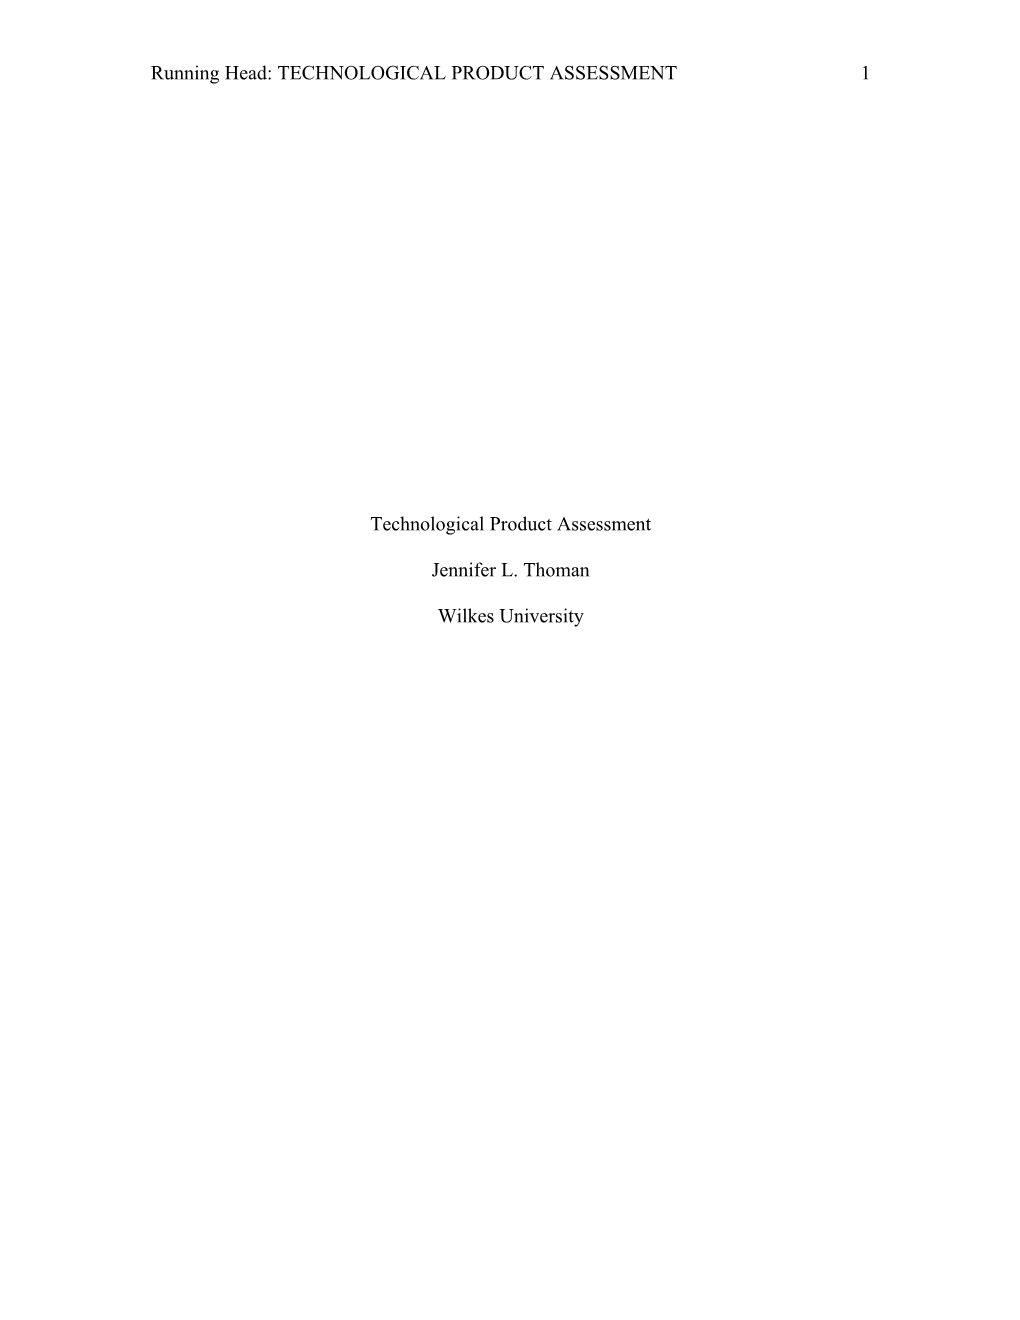 Technological Product Assessment